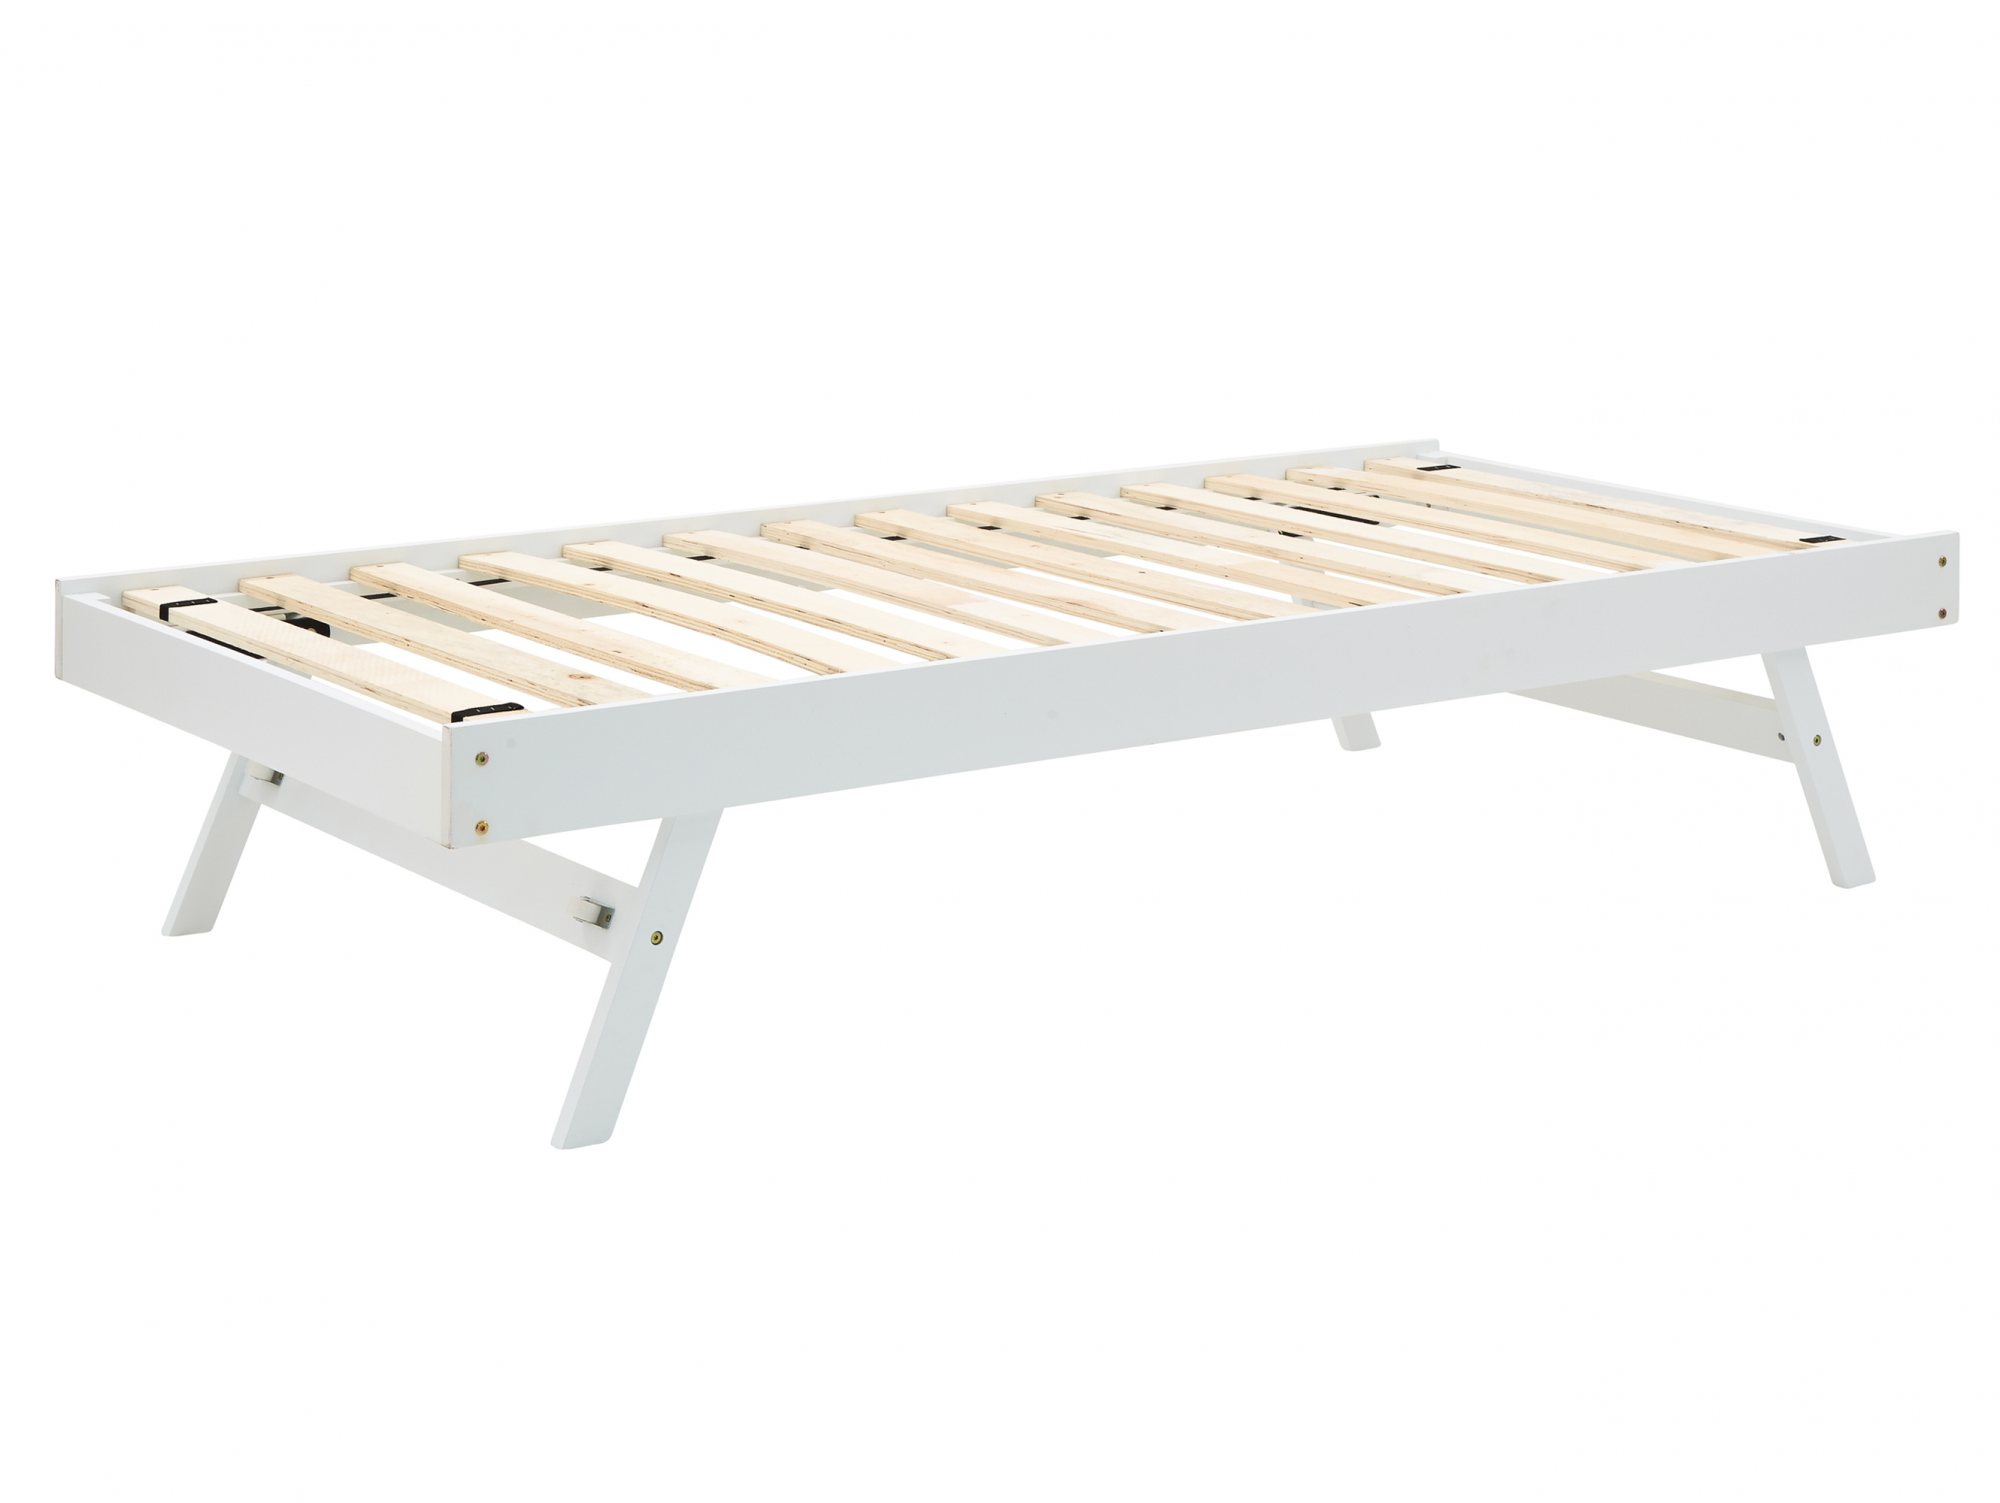 GFW GFW Madrid 3ft Single White Wooden Trundle Under Bed Frame